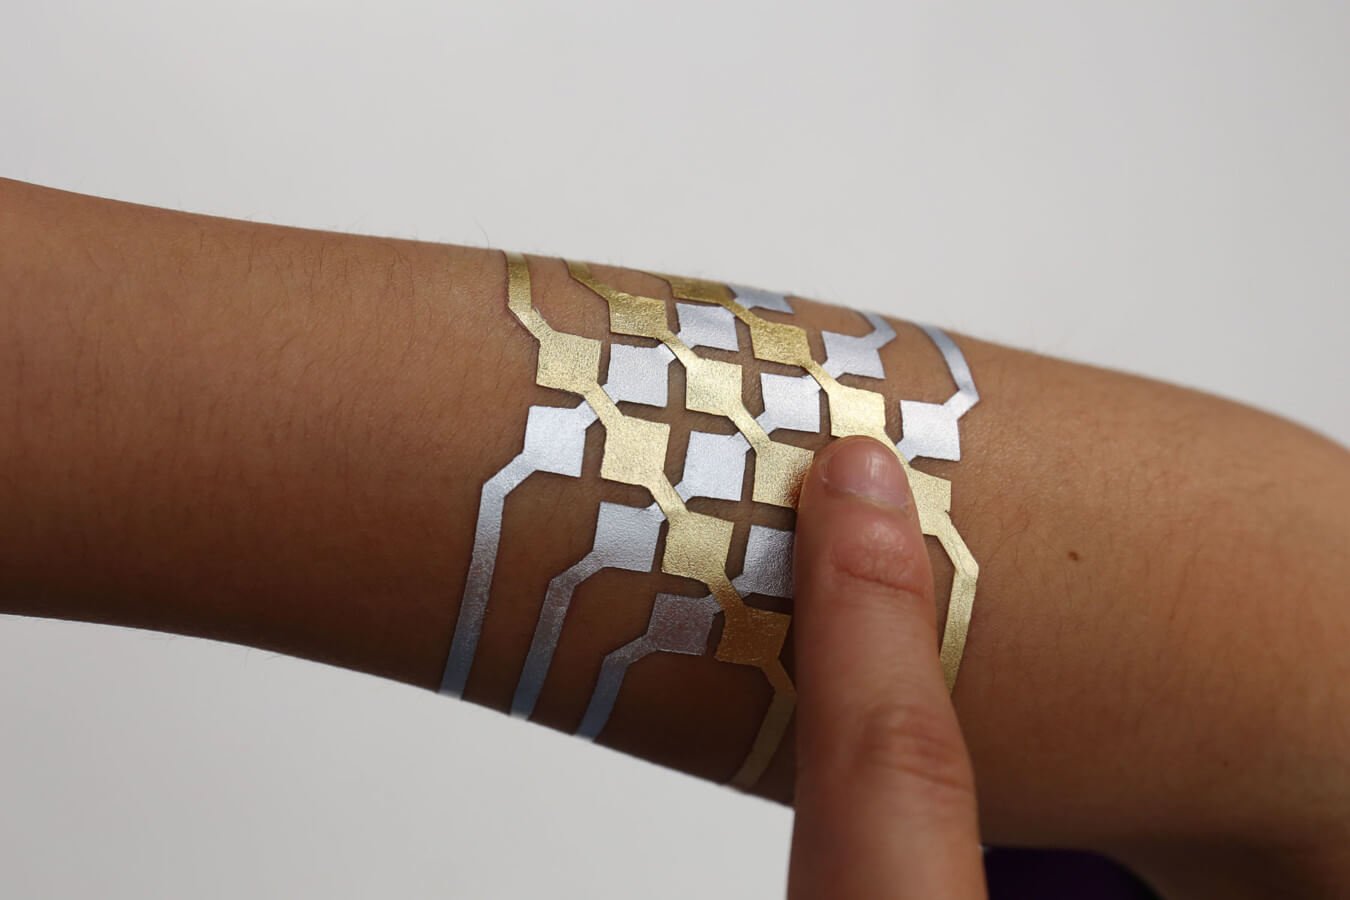 This sticker can measure blood pressure and other body chemicals